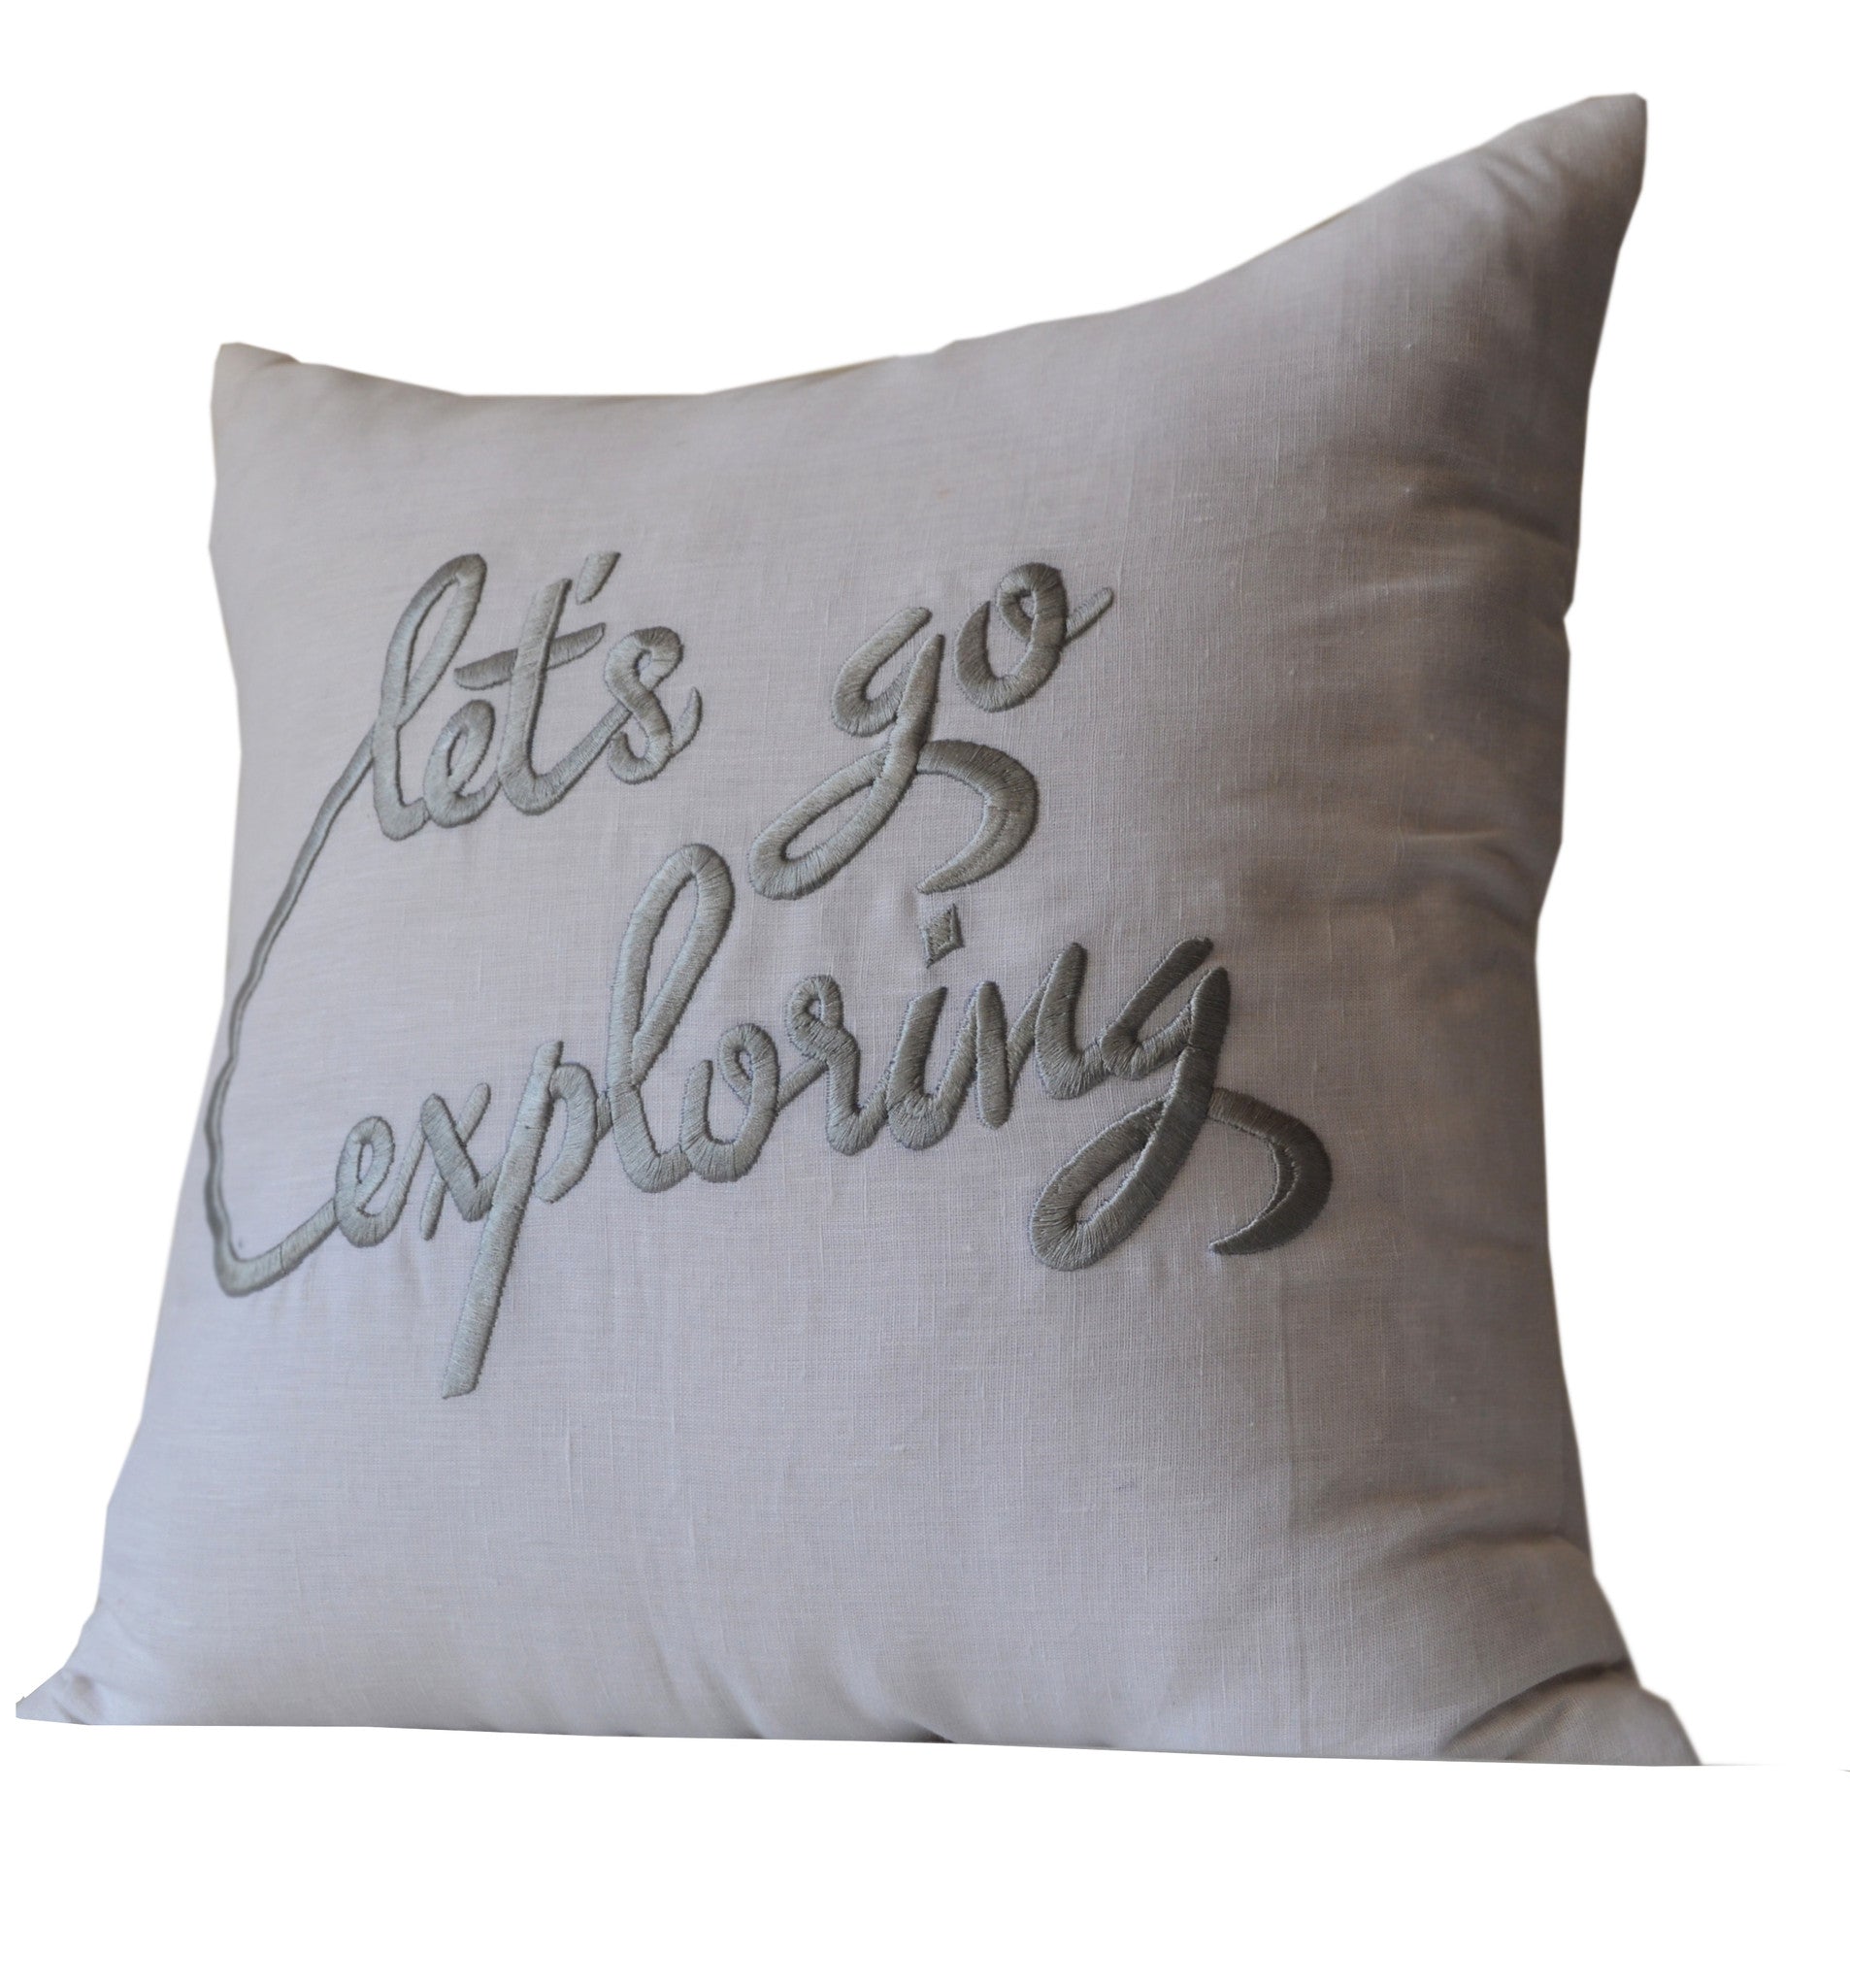 Handmade white linen throw pillow with personalized message